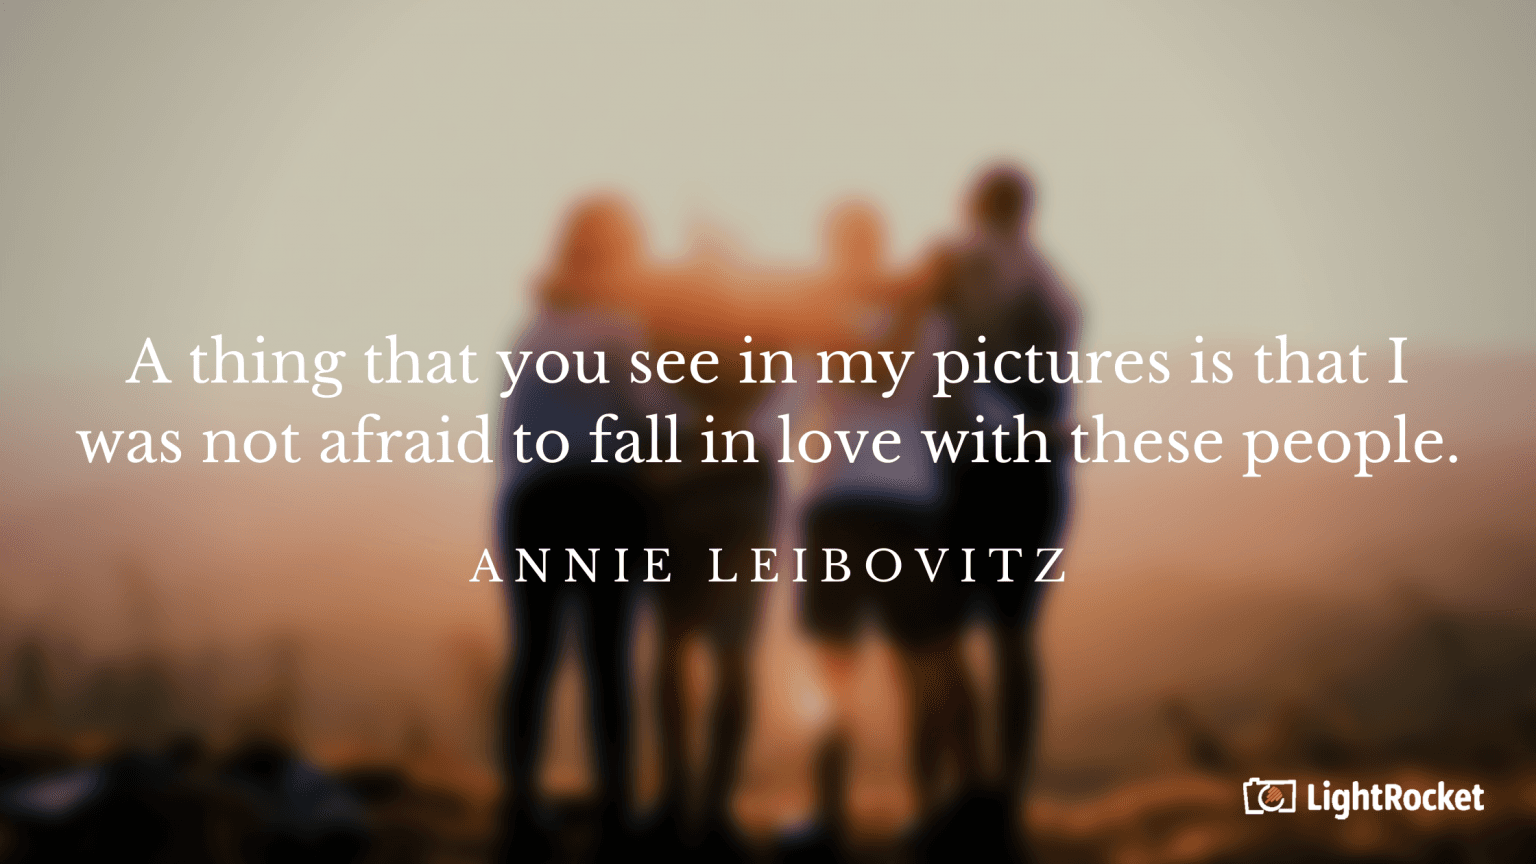 “A thing that you see in my pictures is that I was not afraid to fall in love with these people.” – Annie Leibovitz